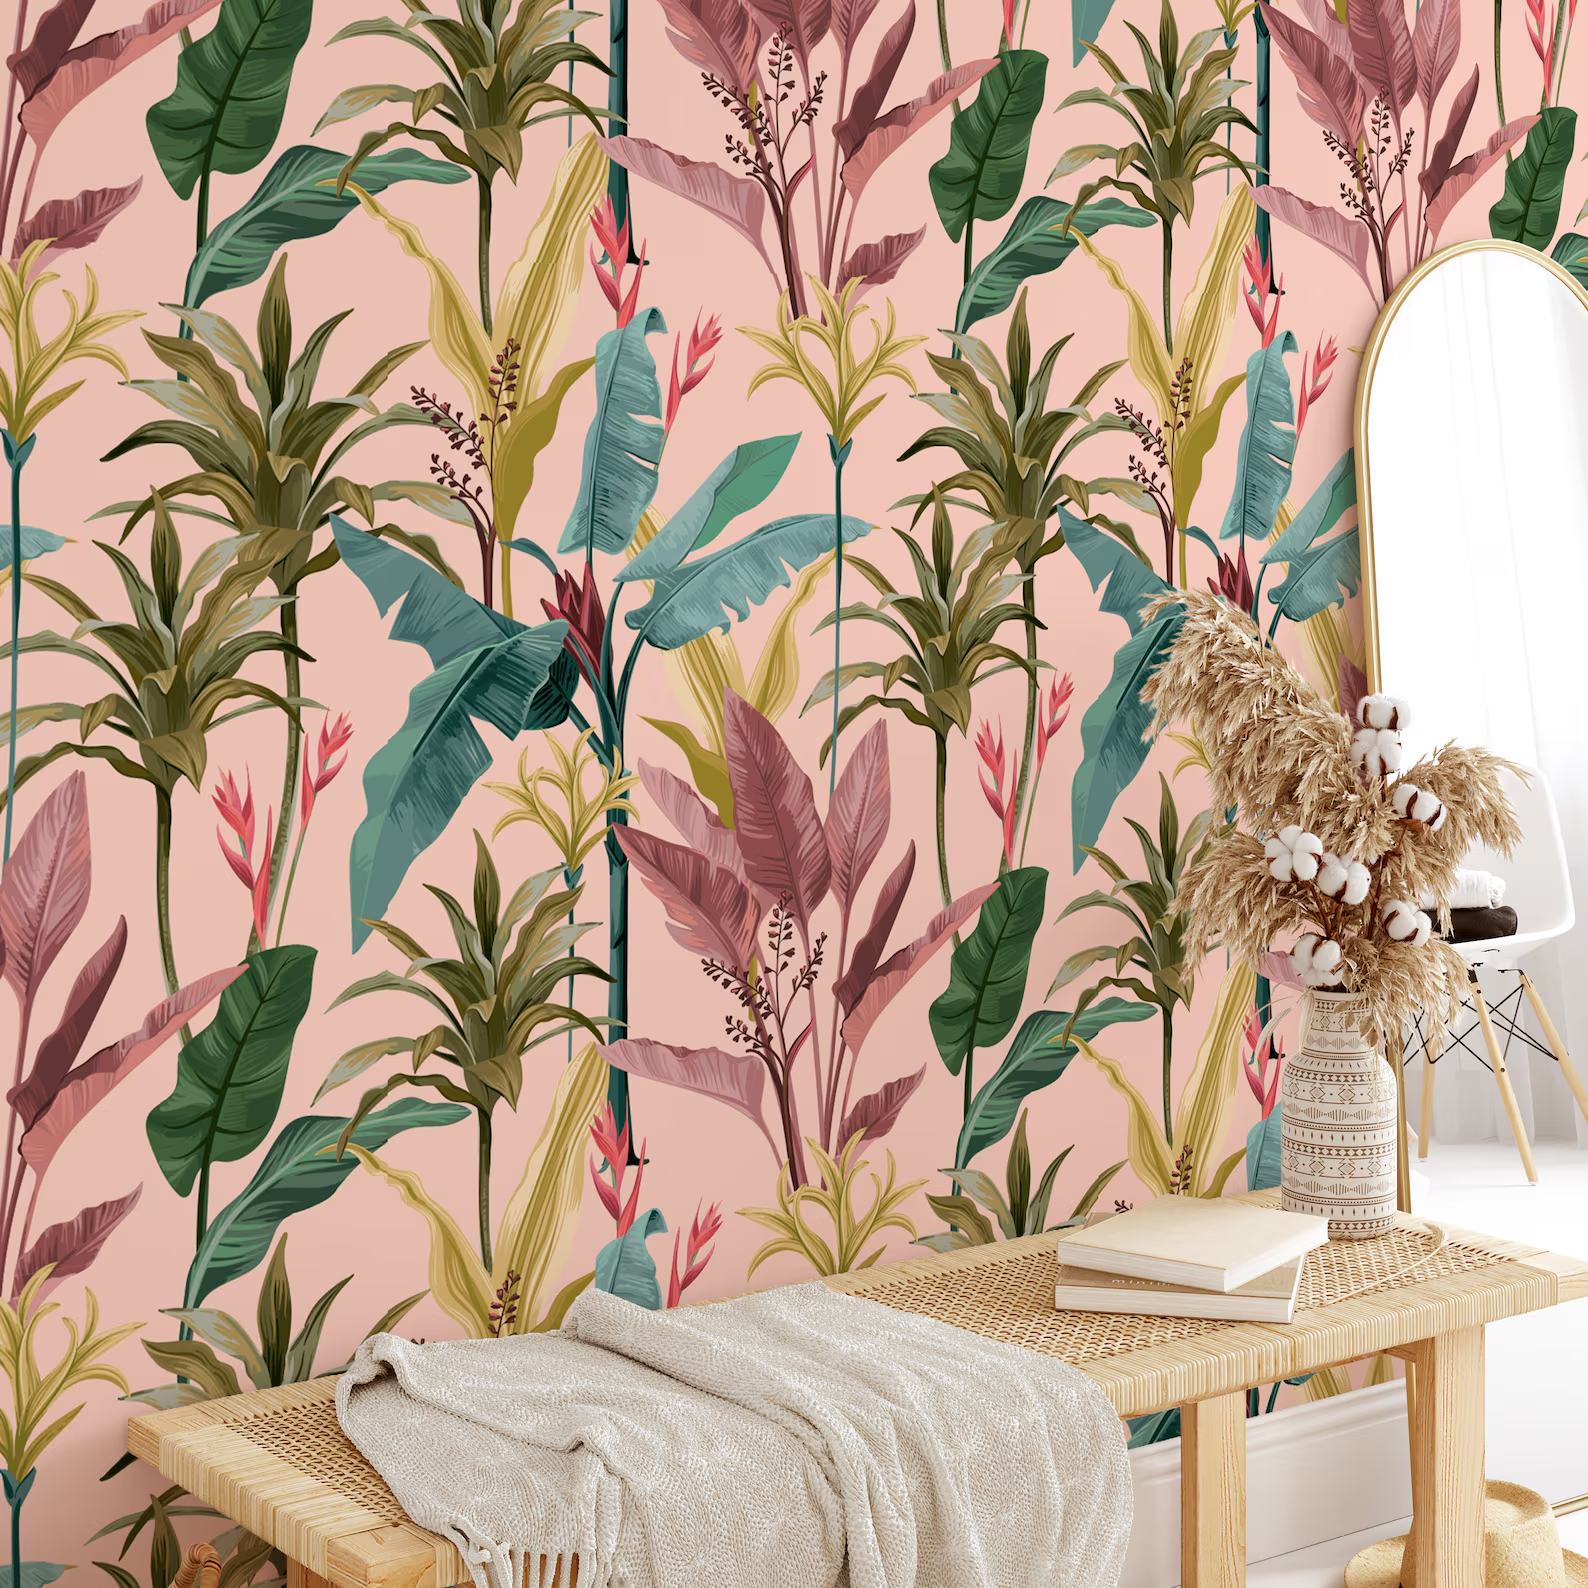 Banana Leaves & Flowers, Removable Wallpaper, Self Adhesive Wallpaper, Pasted Wallpaper, Mural, Temporary, Feature Wall - Etsy